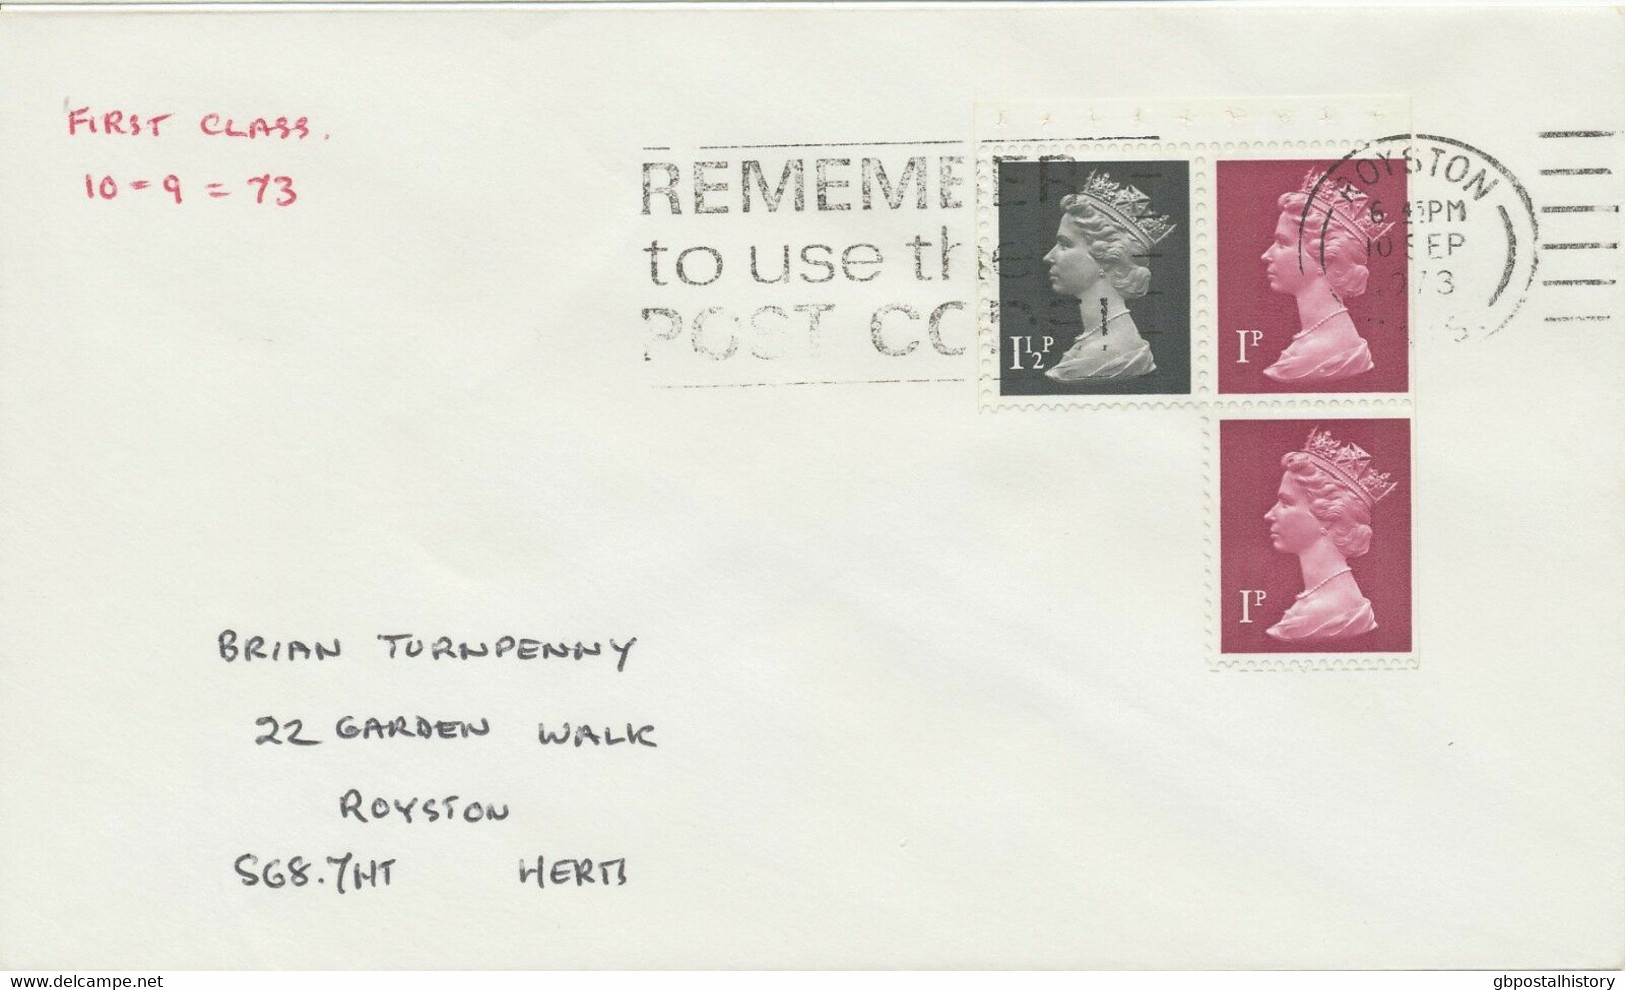 GB 1973 Machin 1 1/2P+1P+1P First Day Cover New Postage Rate 3 1/2P 1stCl - Série 'Machin'